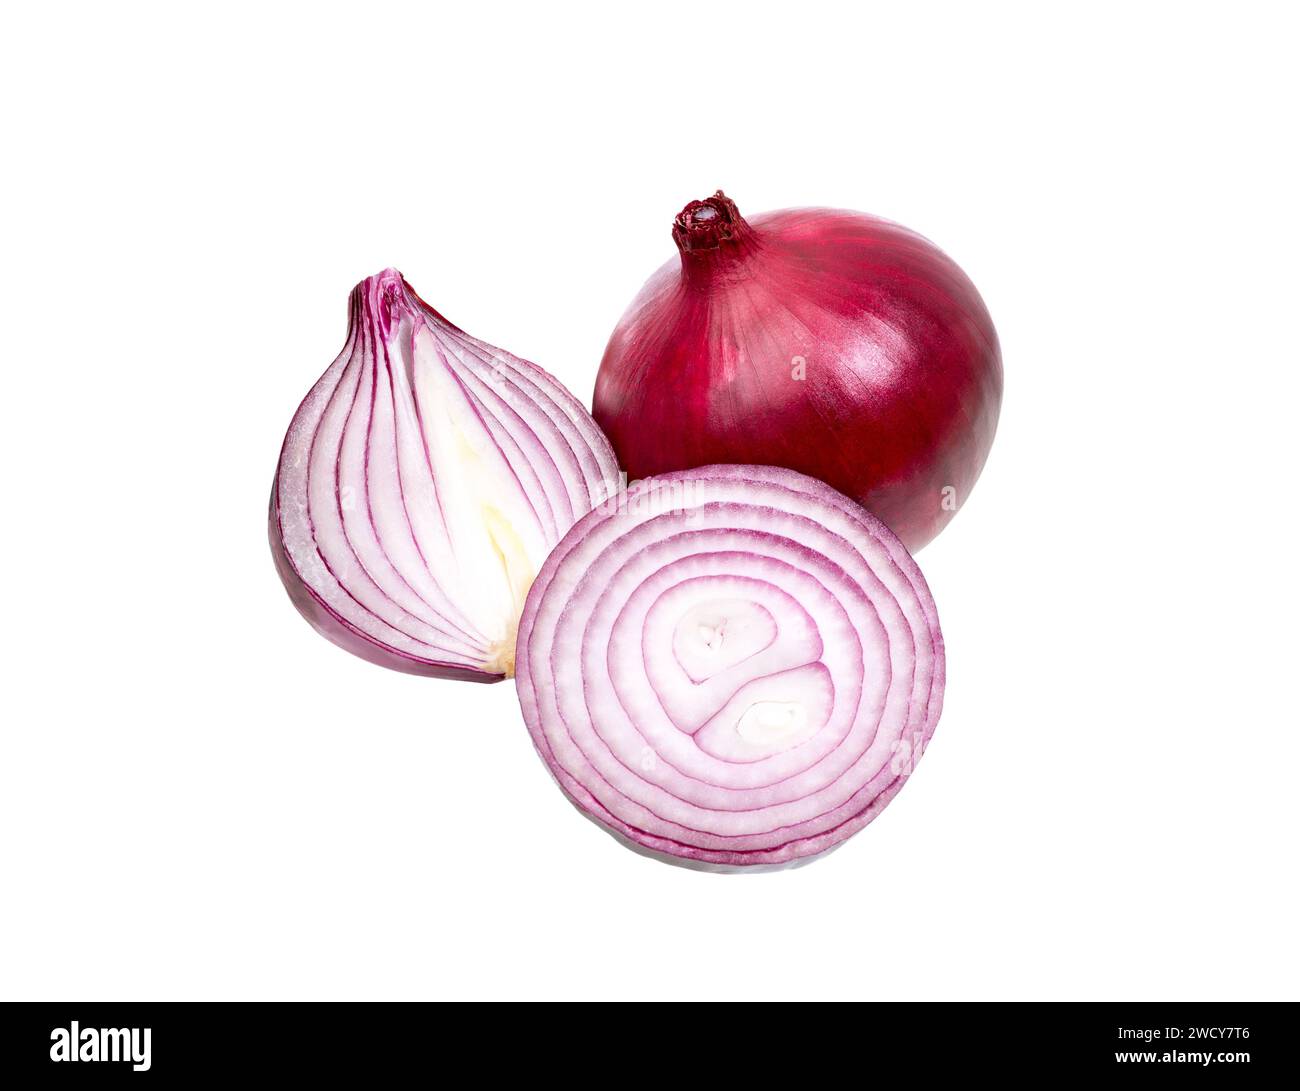 Onion. Whole and sliced onions isolated on white background. Full depth of field. Stock Photo